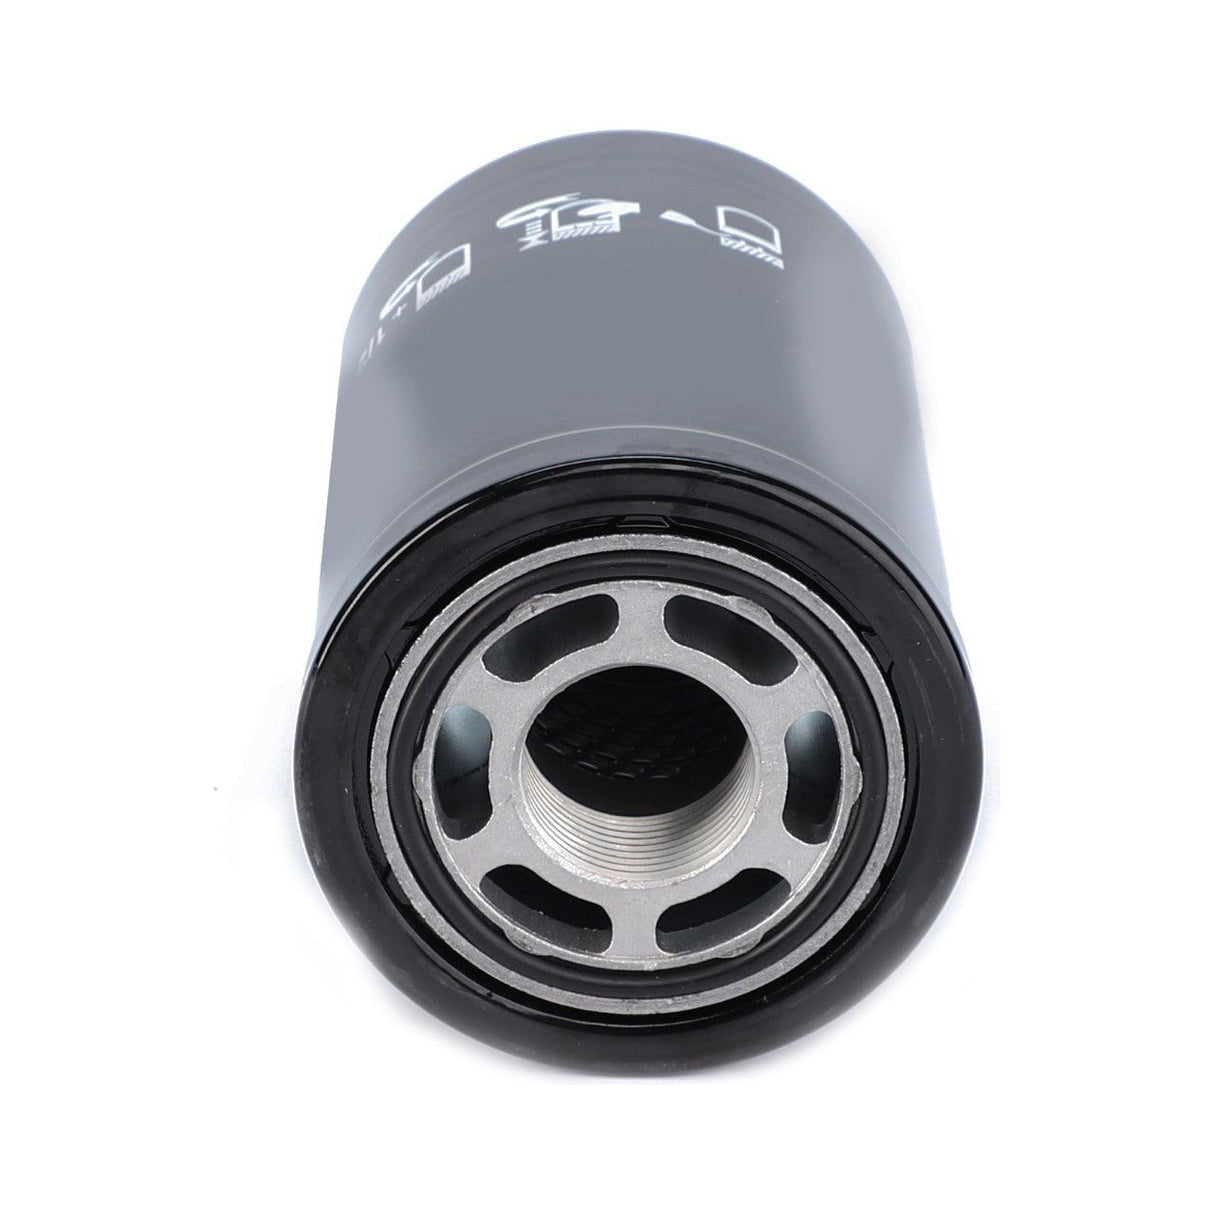 Hydraulic Filter Spin On - 532370D1 - Farming Parts